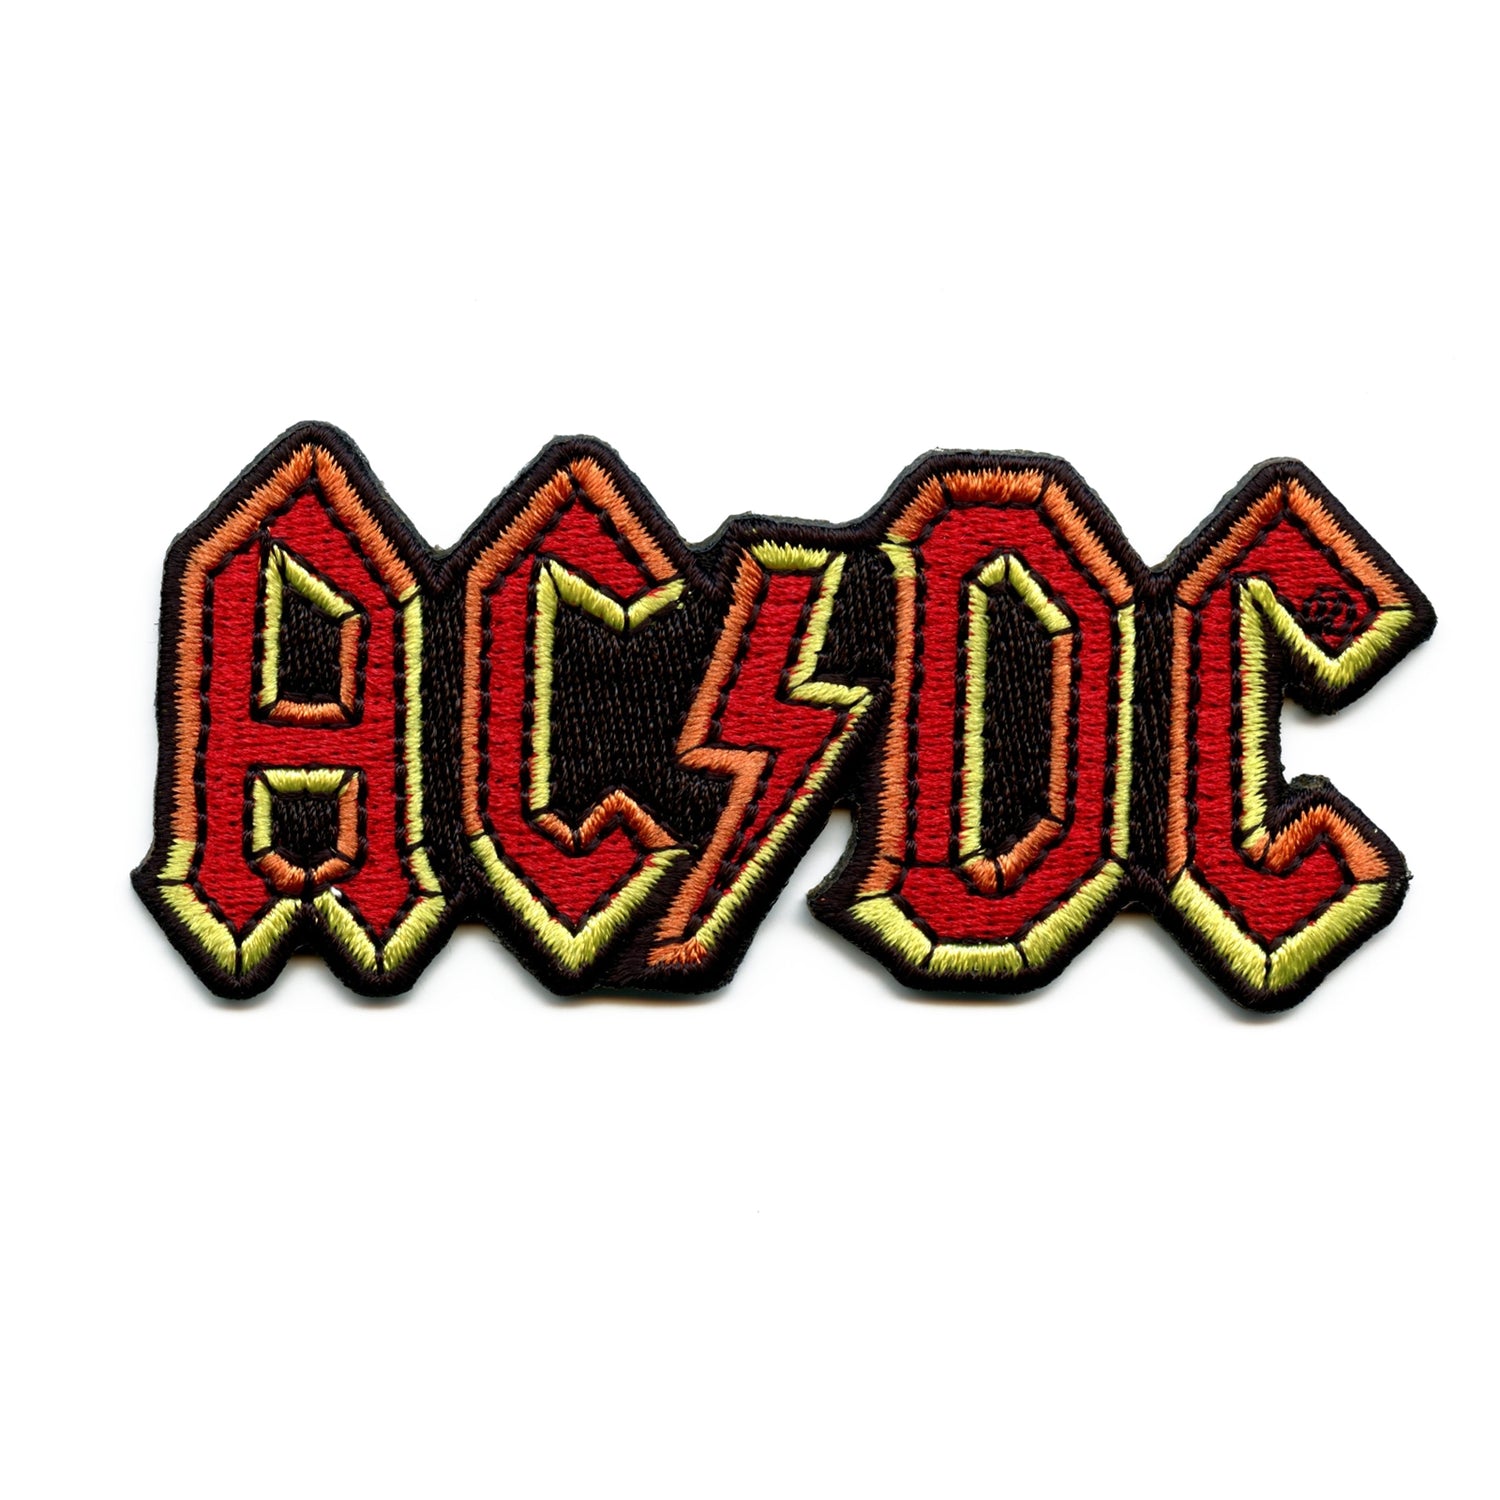 ACDC Patches